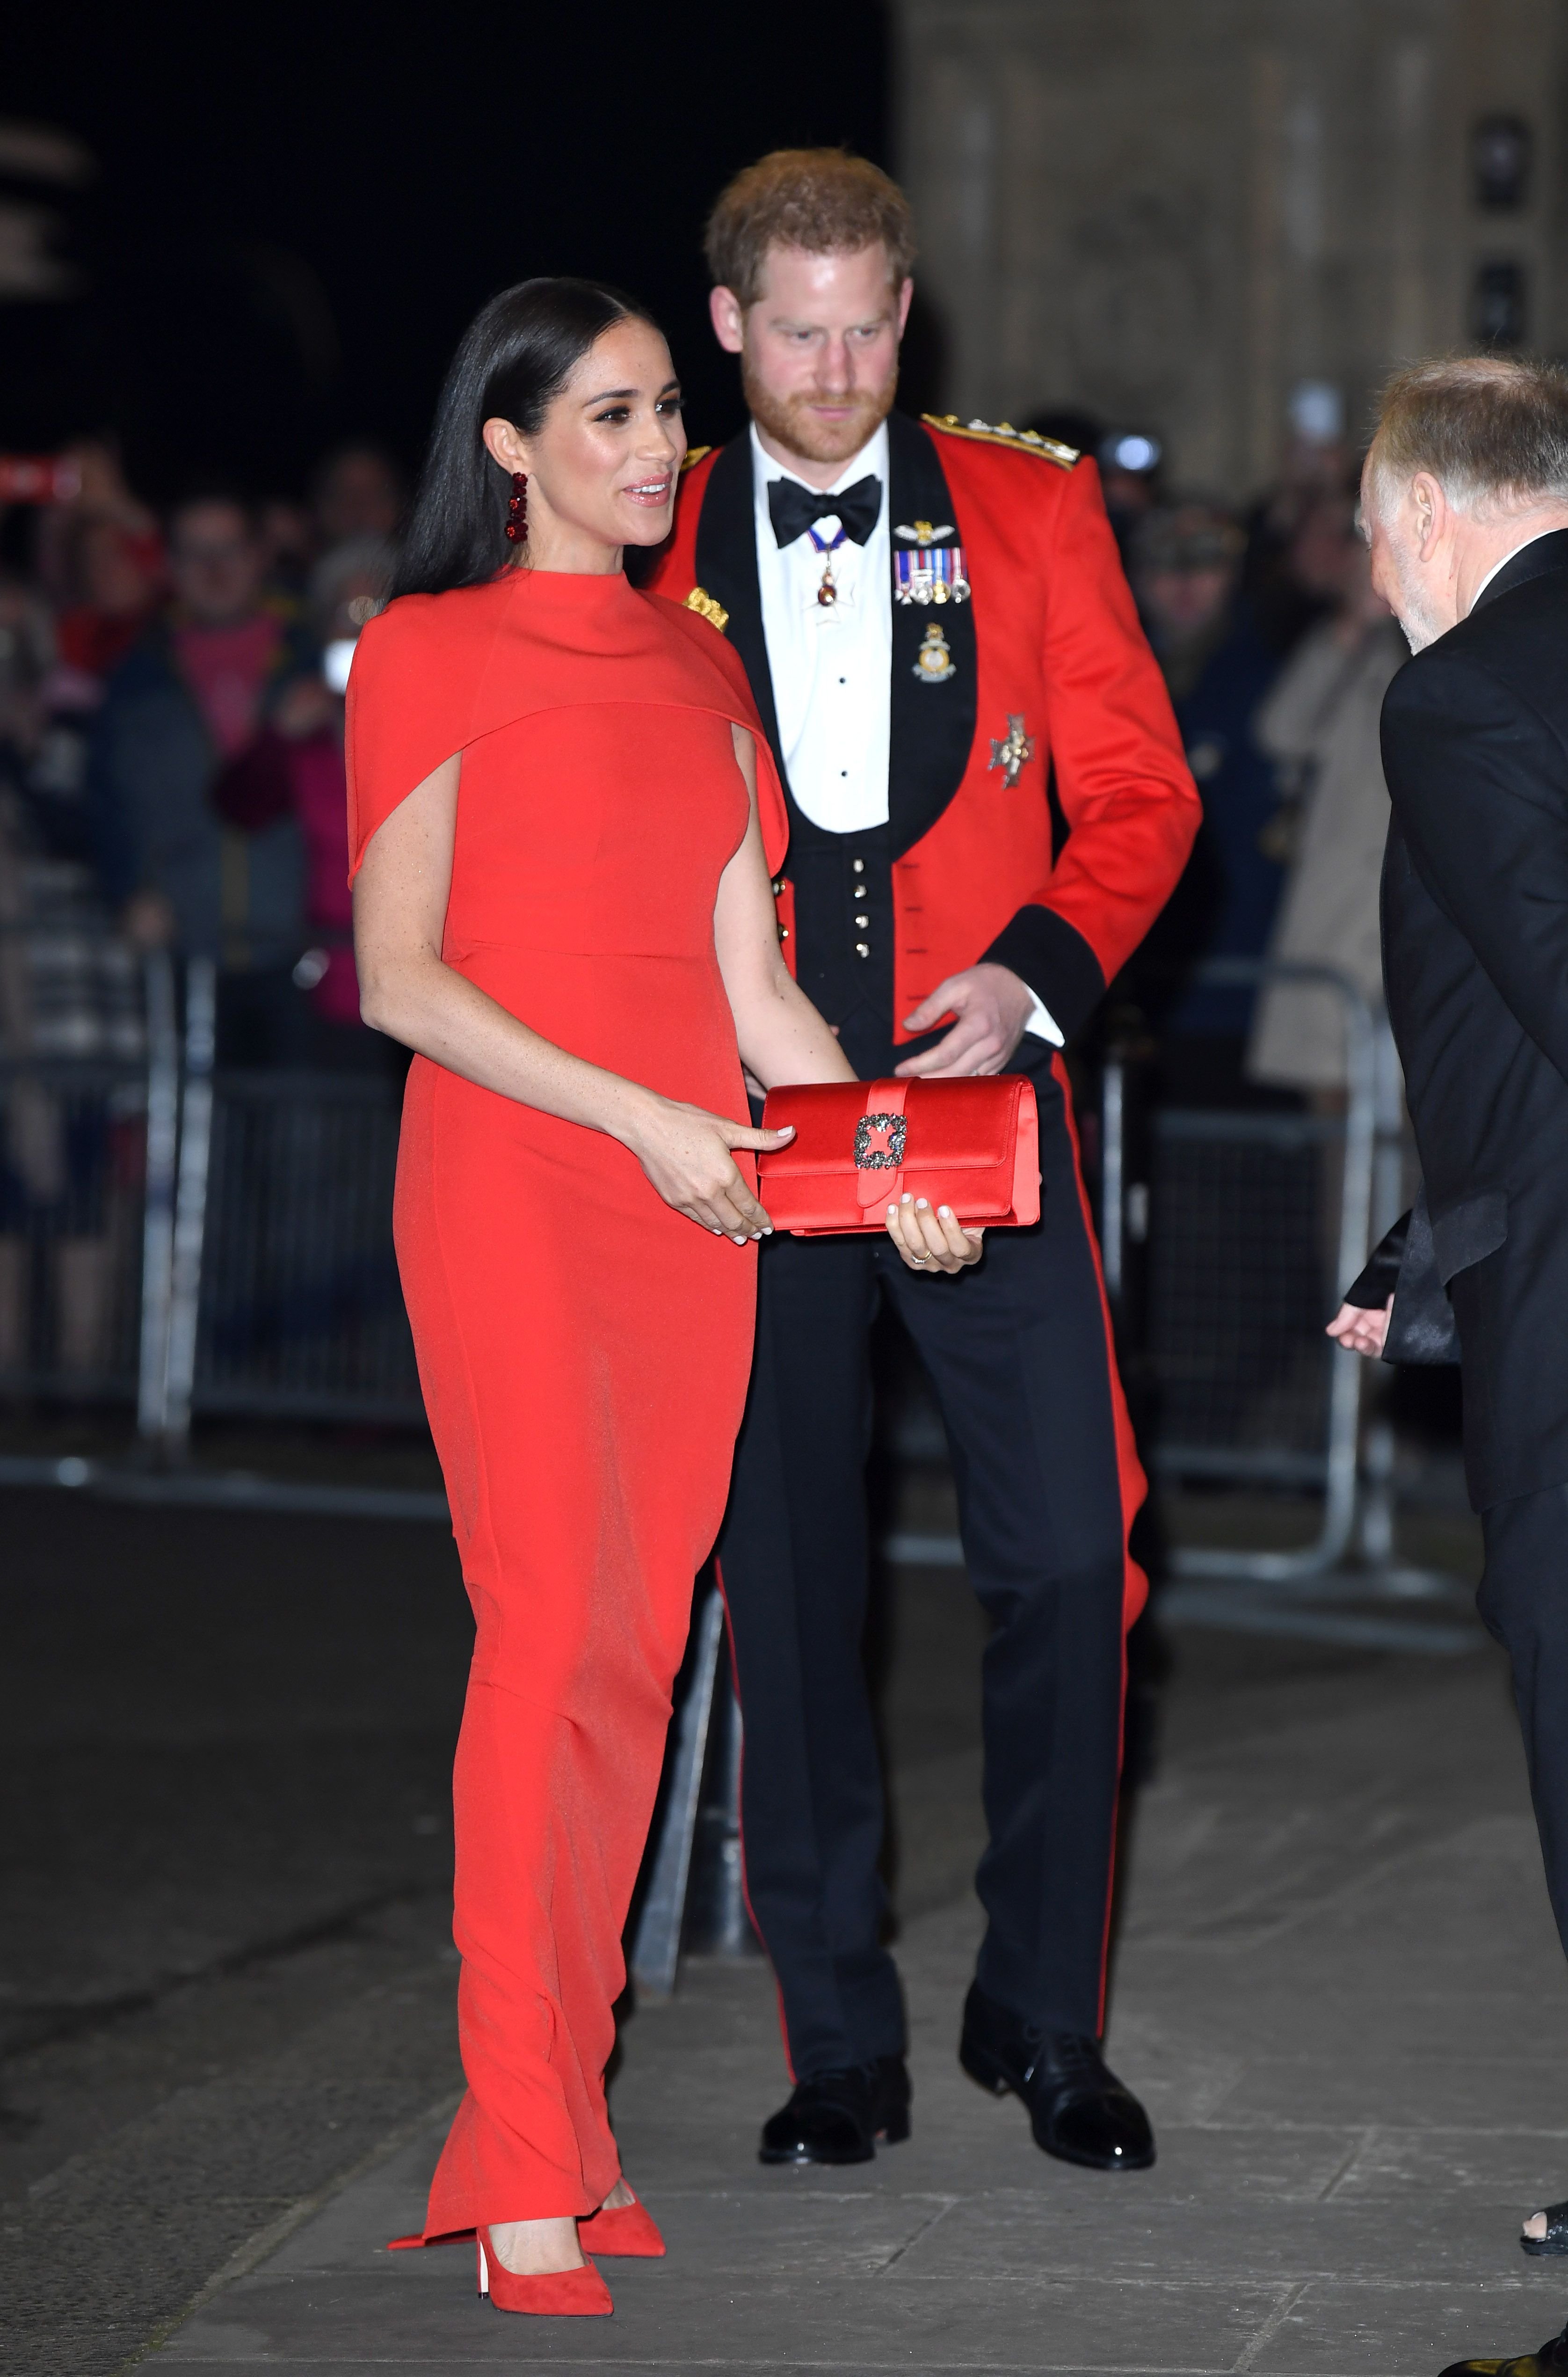 Duchess Meghan and Prince Harry at the Mountbatten Festival of Music on March 07, 2020, in London, England | Photo: Getty Images